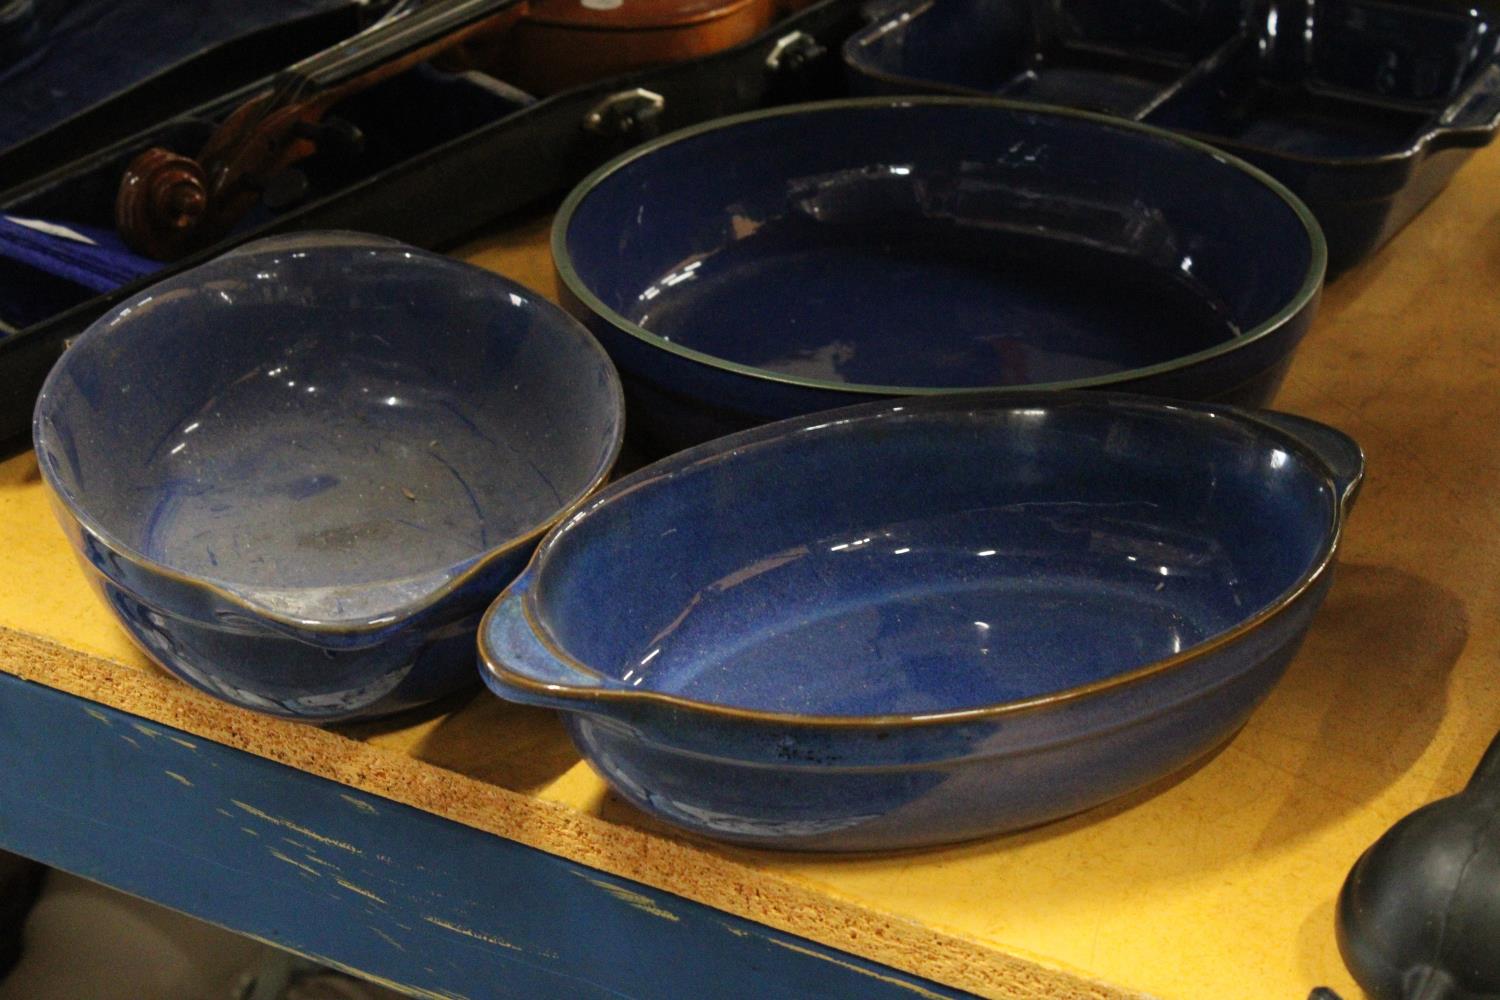 FIVE LARGE PIECES OF DENBY, BLUE, OVEN DISHES - Image 3 of 4